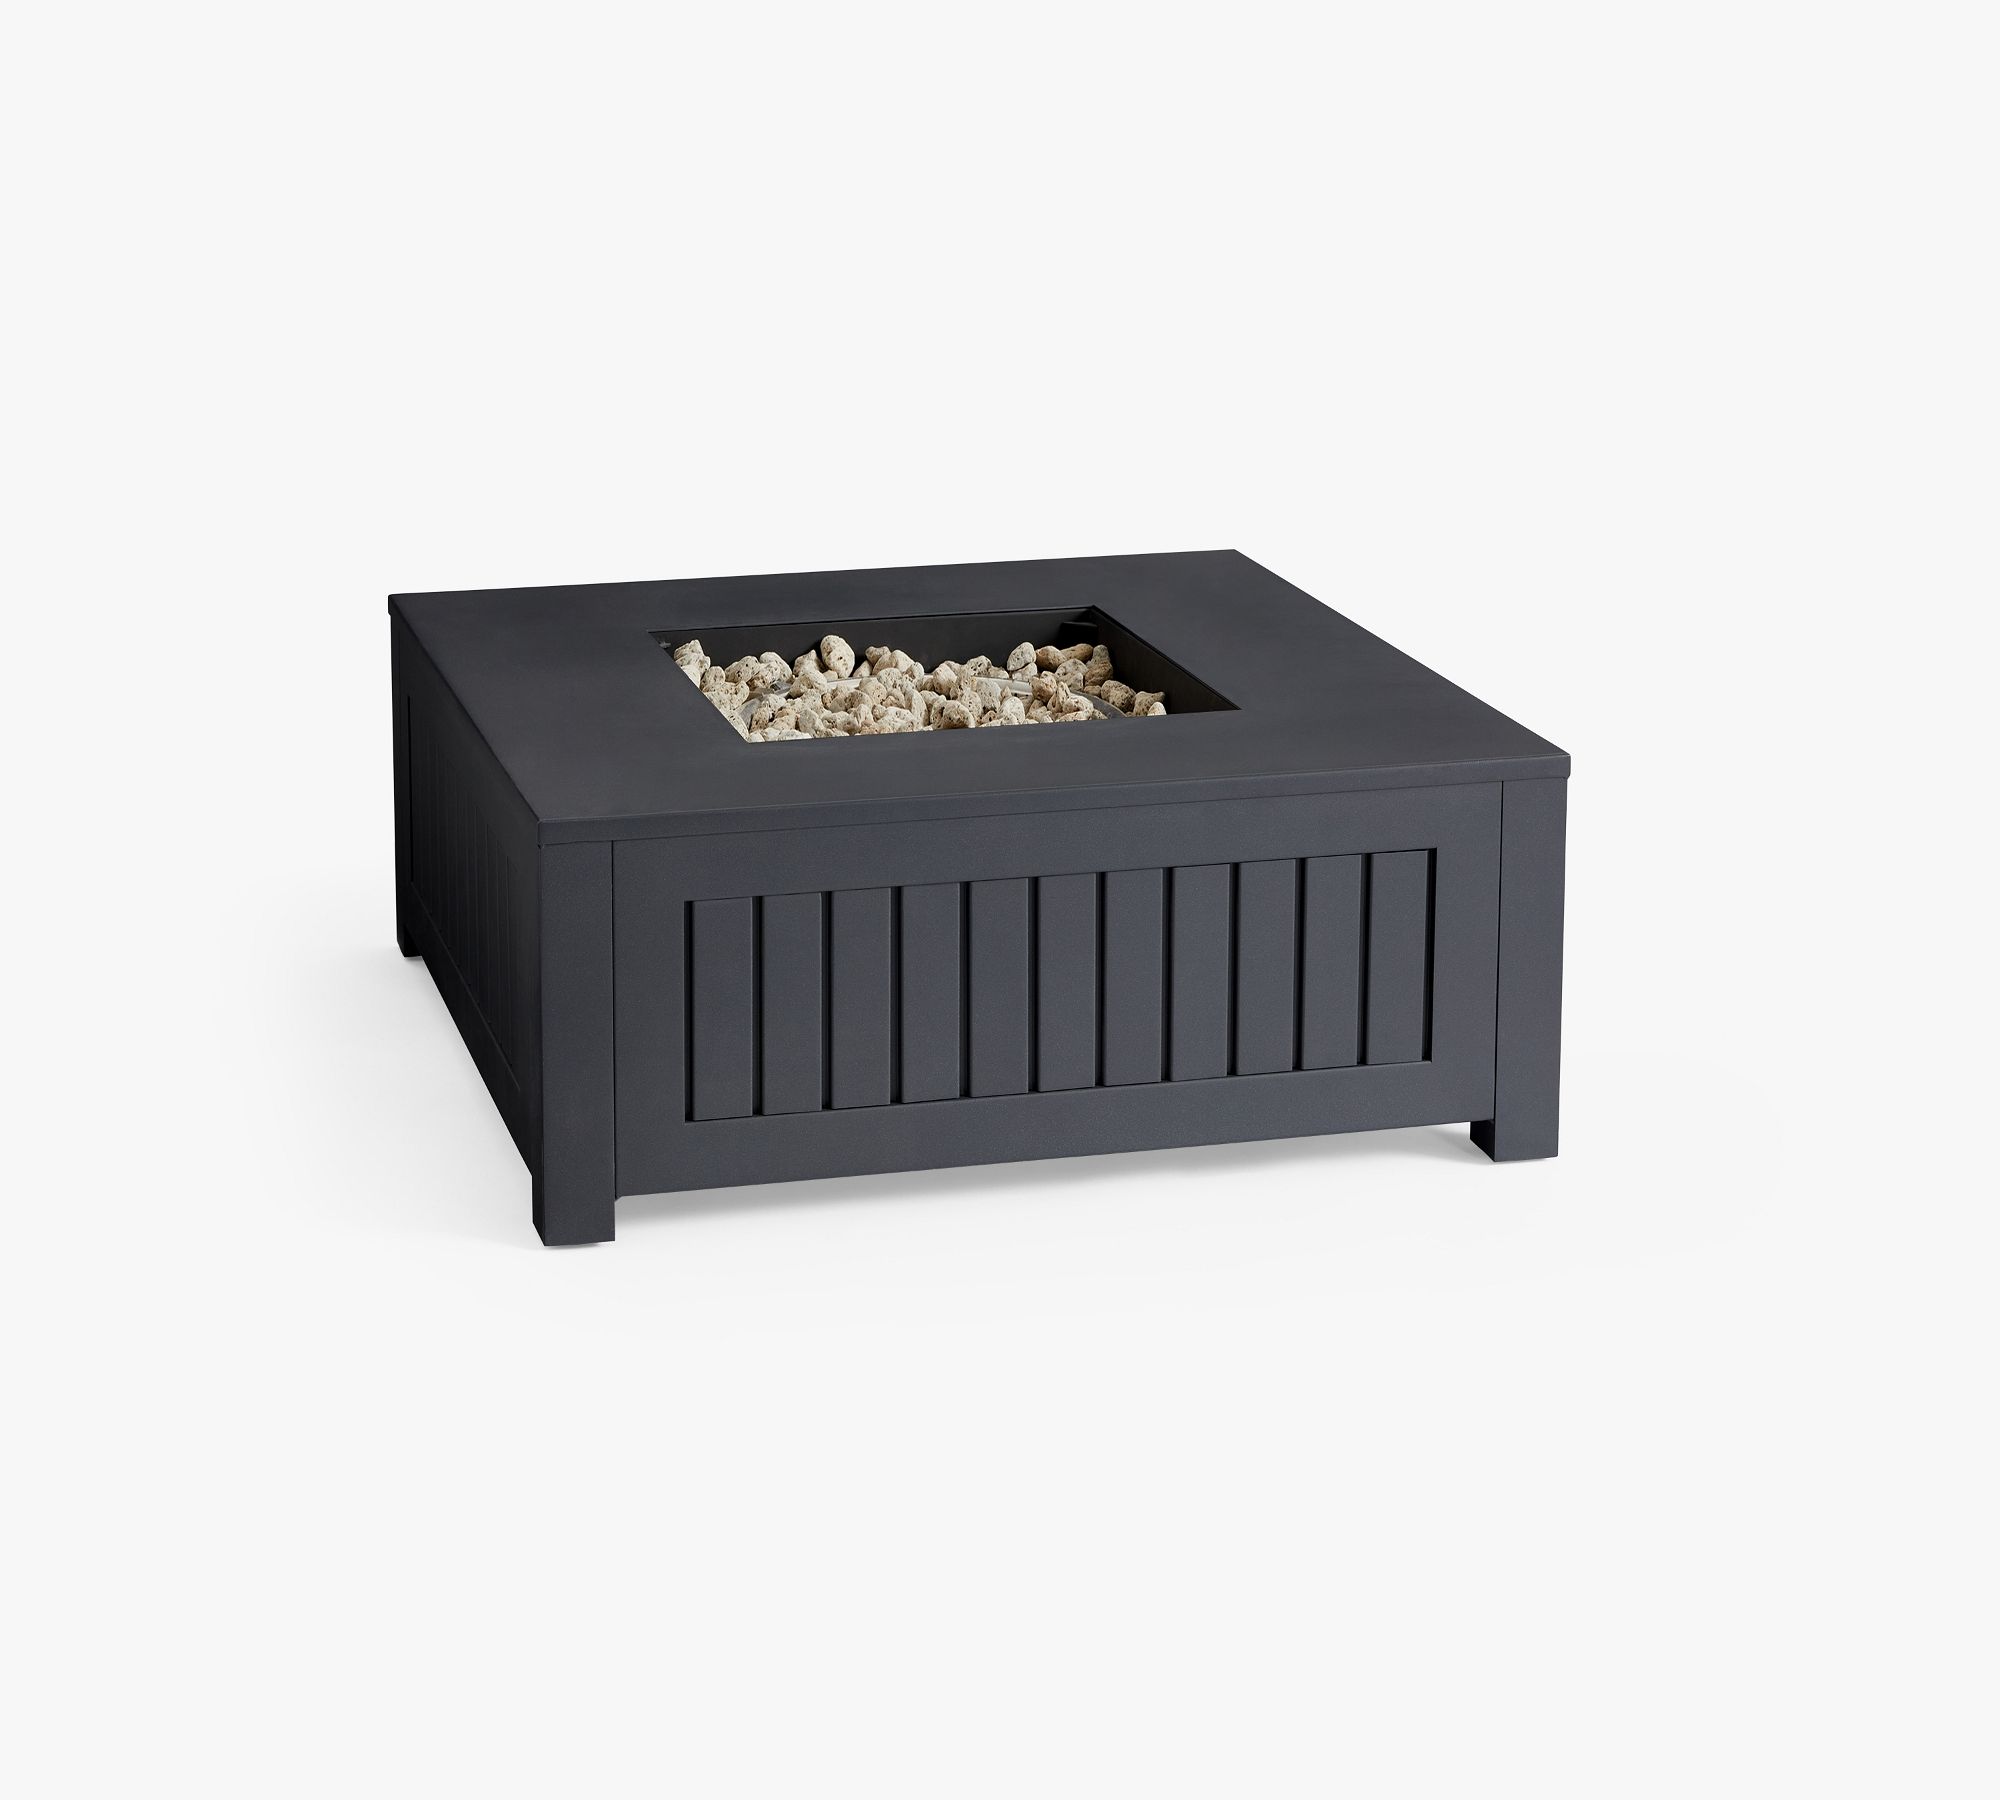 Indio Metal Square Fire Pit Table (36")